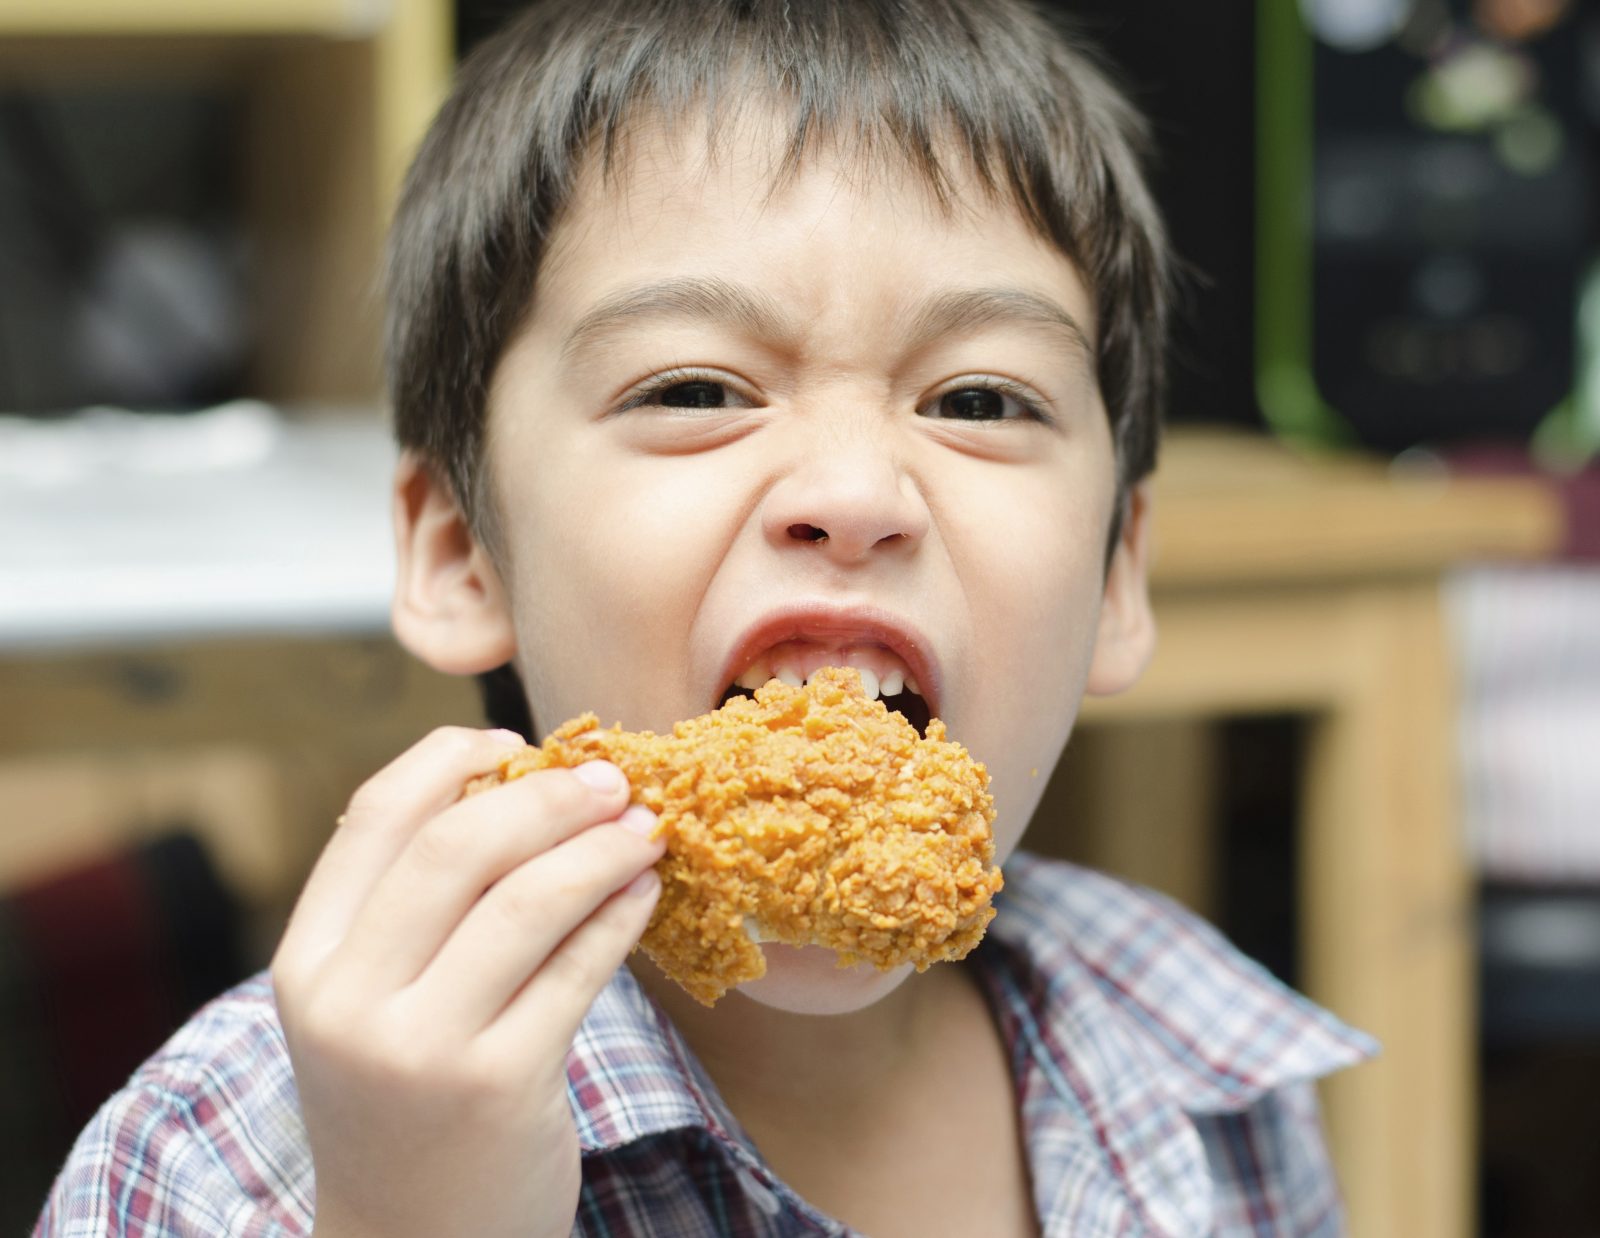 Can You Actually Get a Perfect Score on This Trivia Quiz? Little boy eating fried chicken